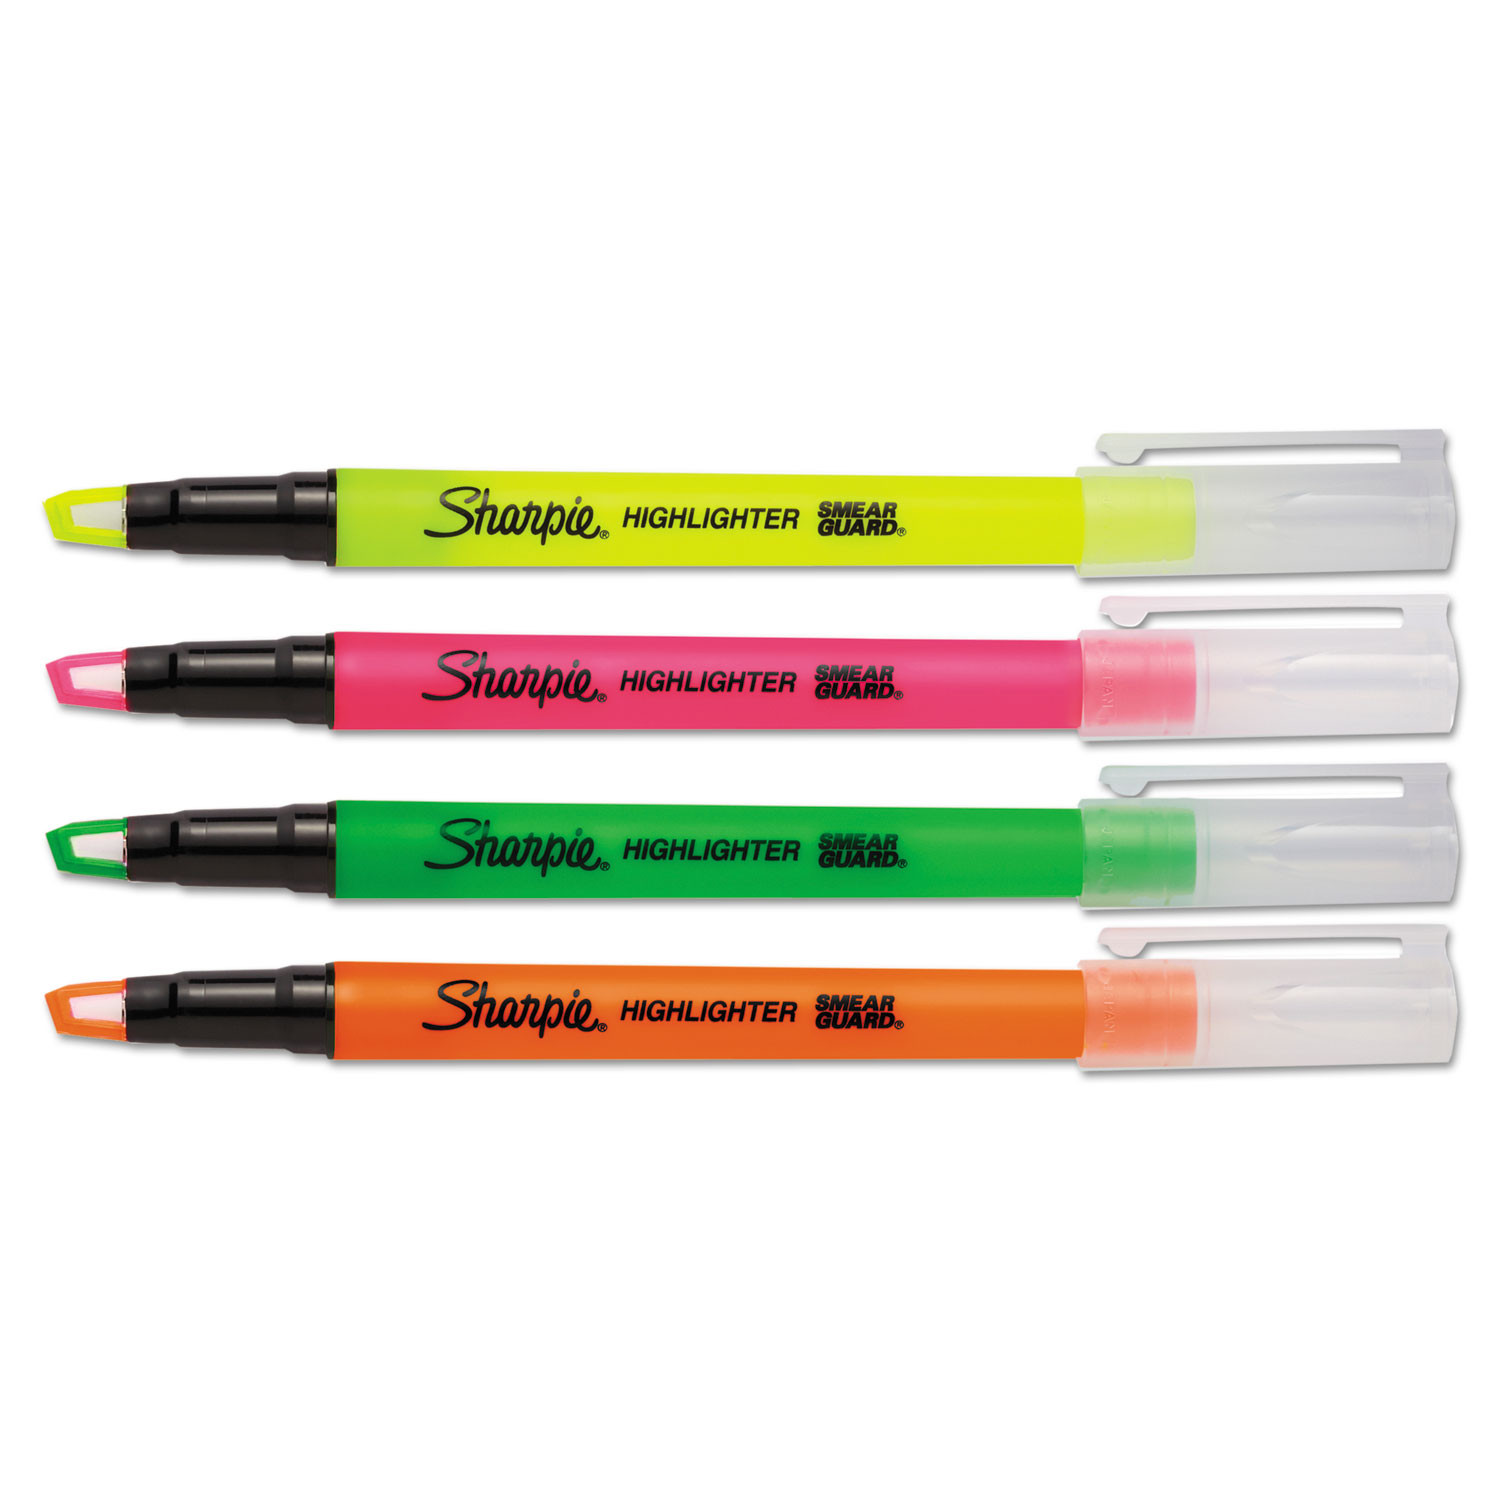 Sharpie Clear View Highlighter Pack (SAN2128227) - Envision Xpress